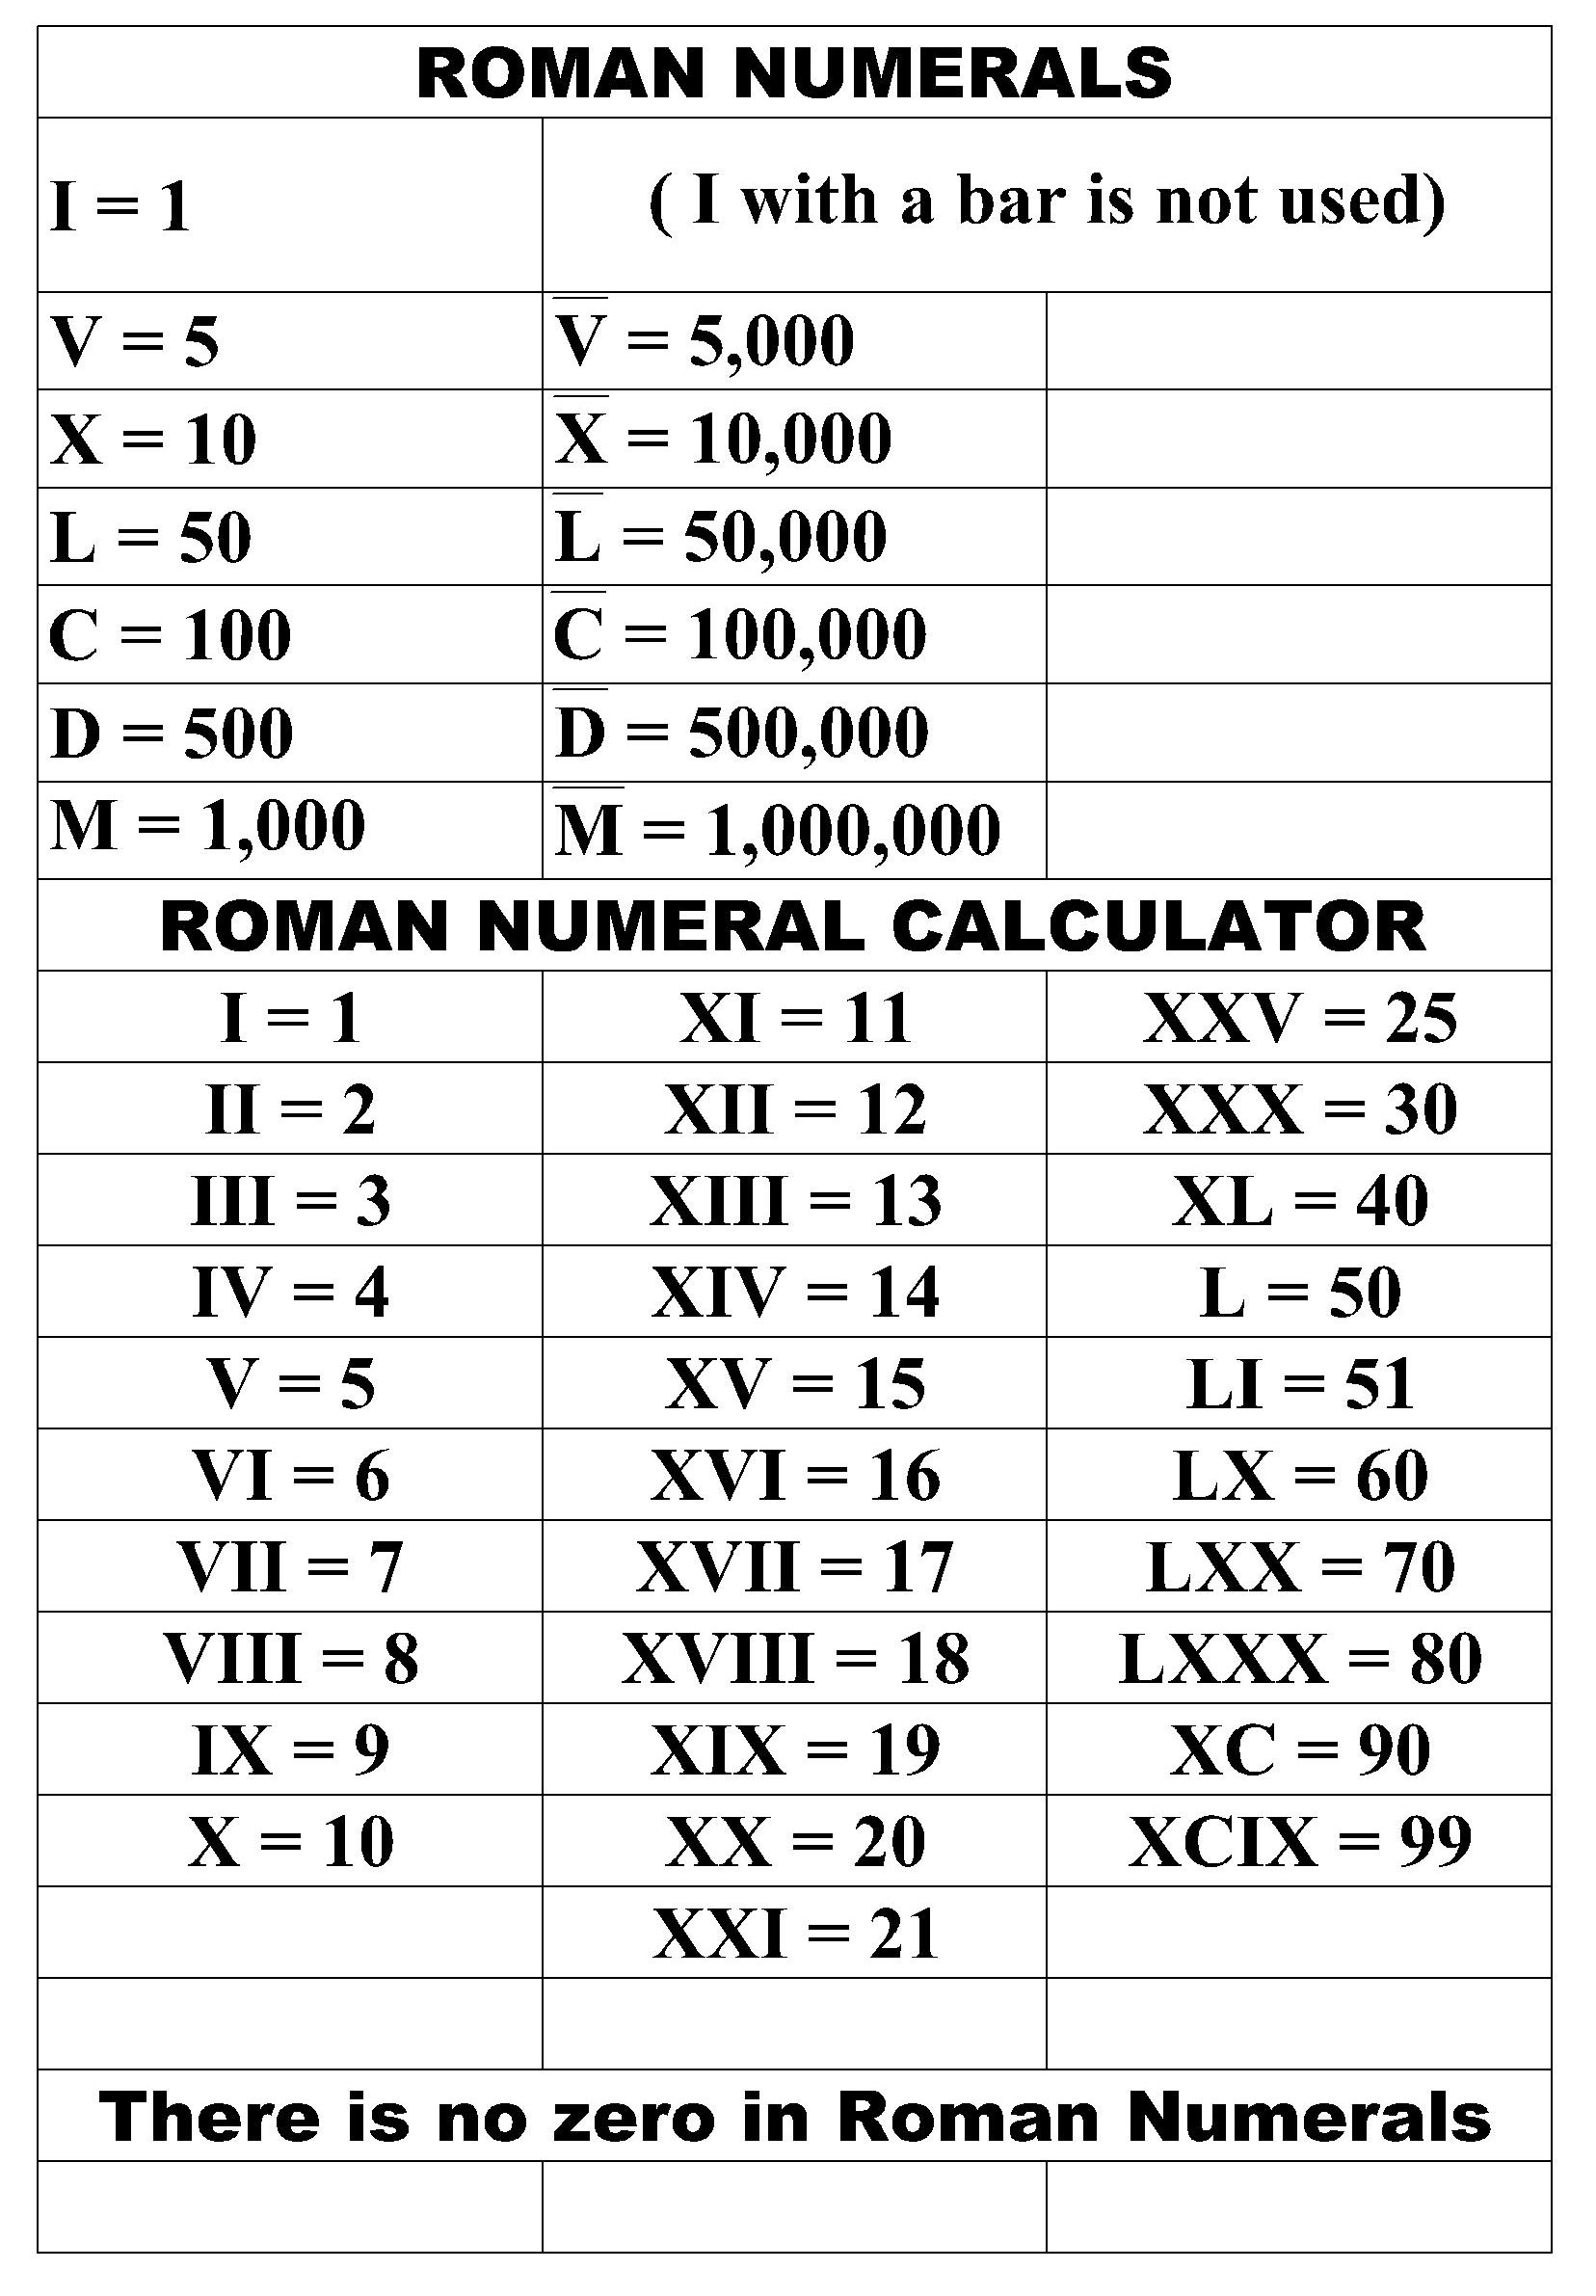 How to write 2012 in roman numerals